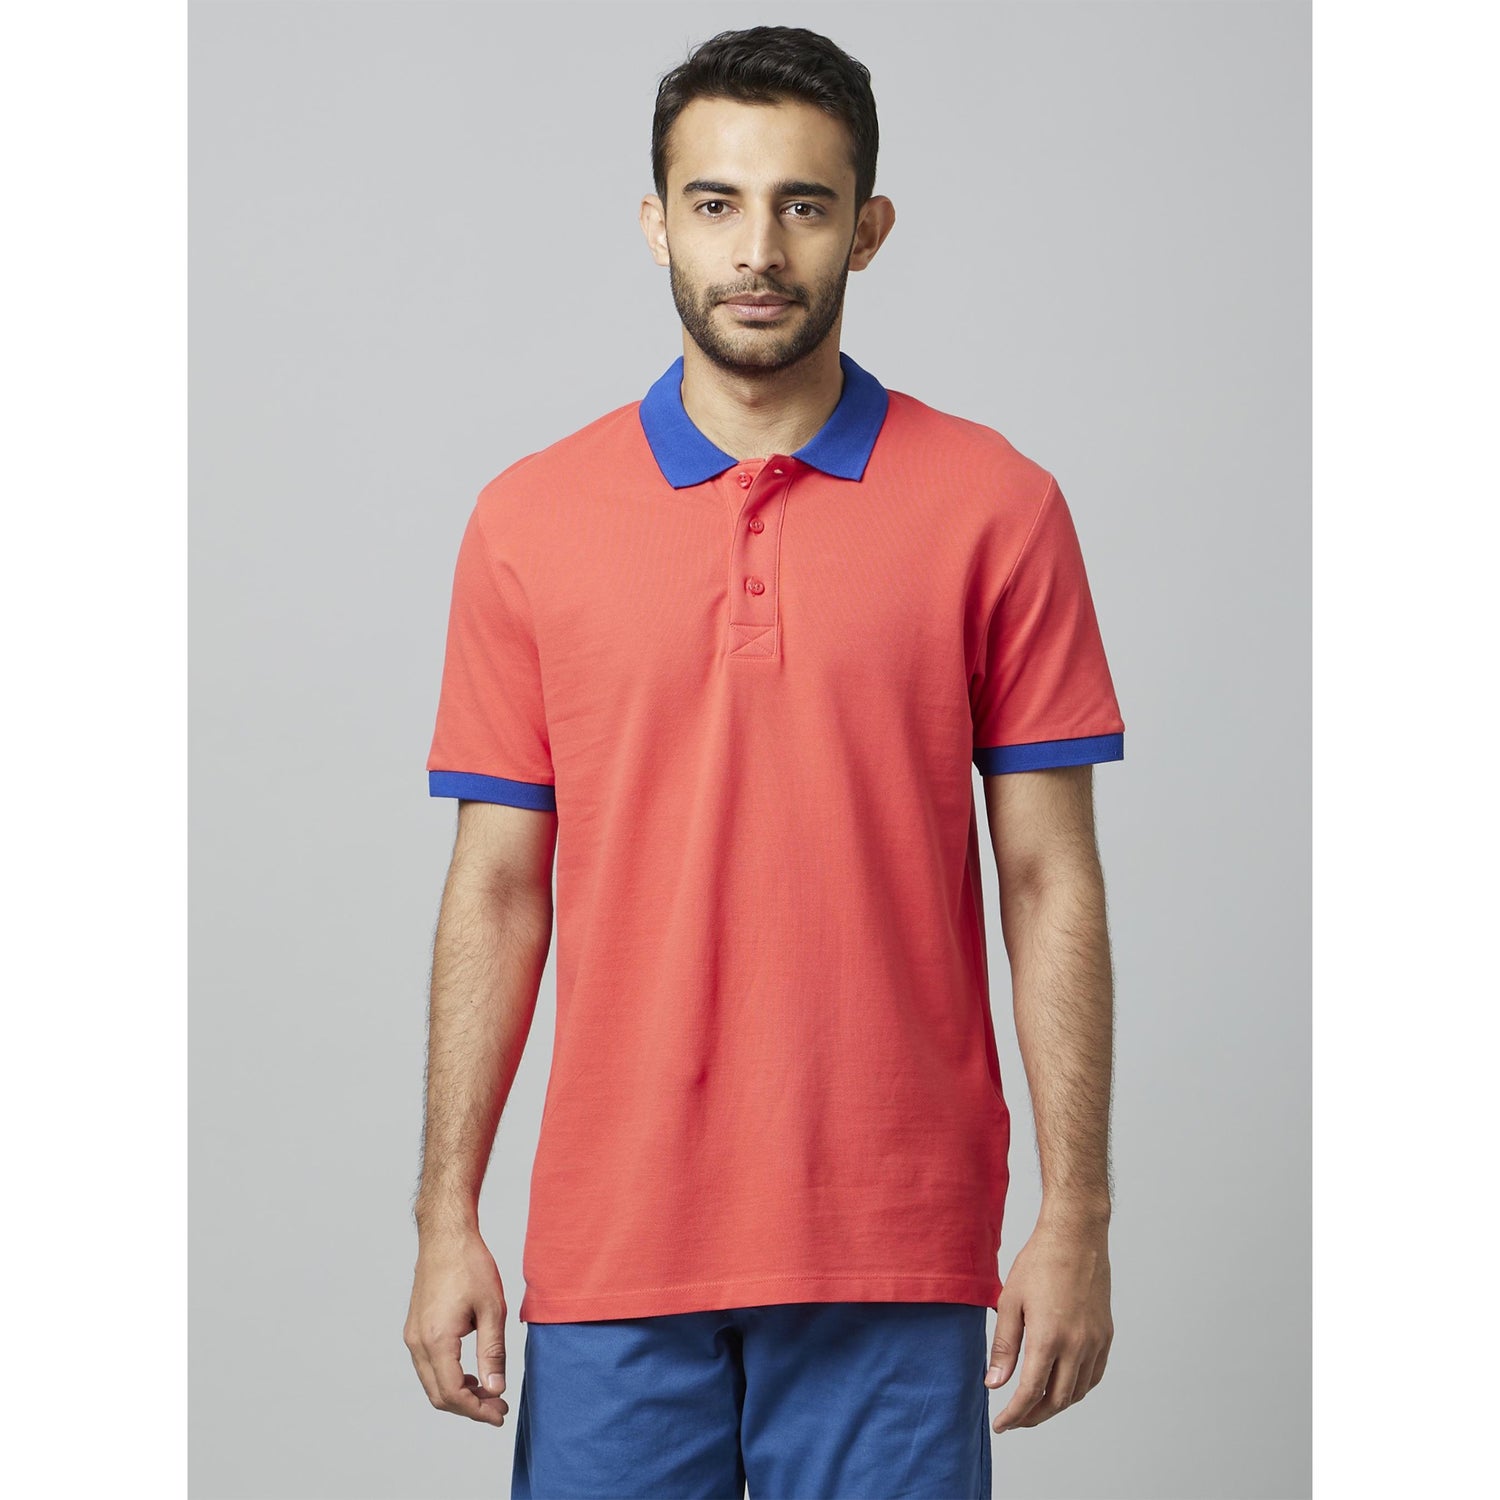 Solid Red Half Sleeves Polo T-Shirt